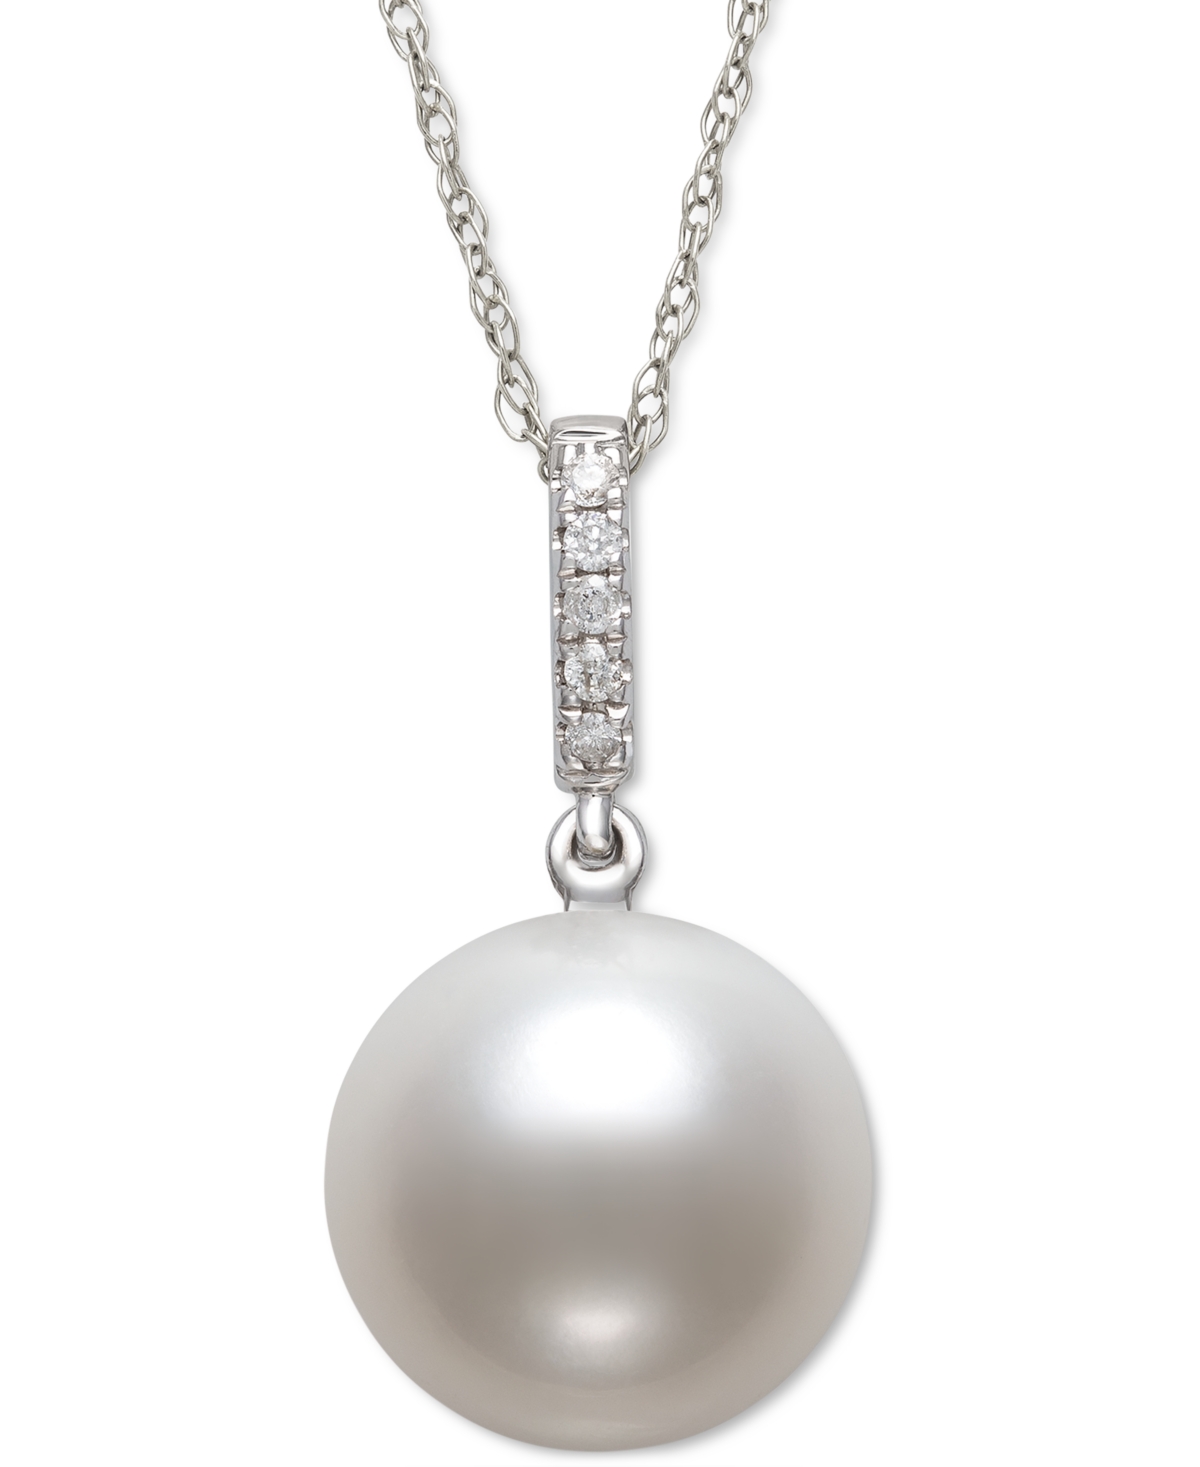 Cultured Freshwater Pearl (6mm) & Diamond Accent 18" Pendant Necklace in 14k White Gold, Created for Macy's - White Gold